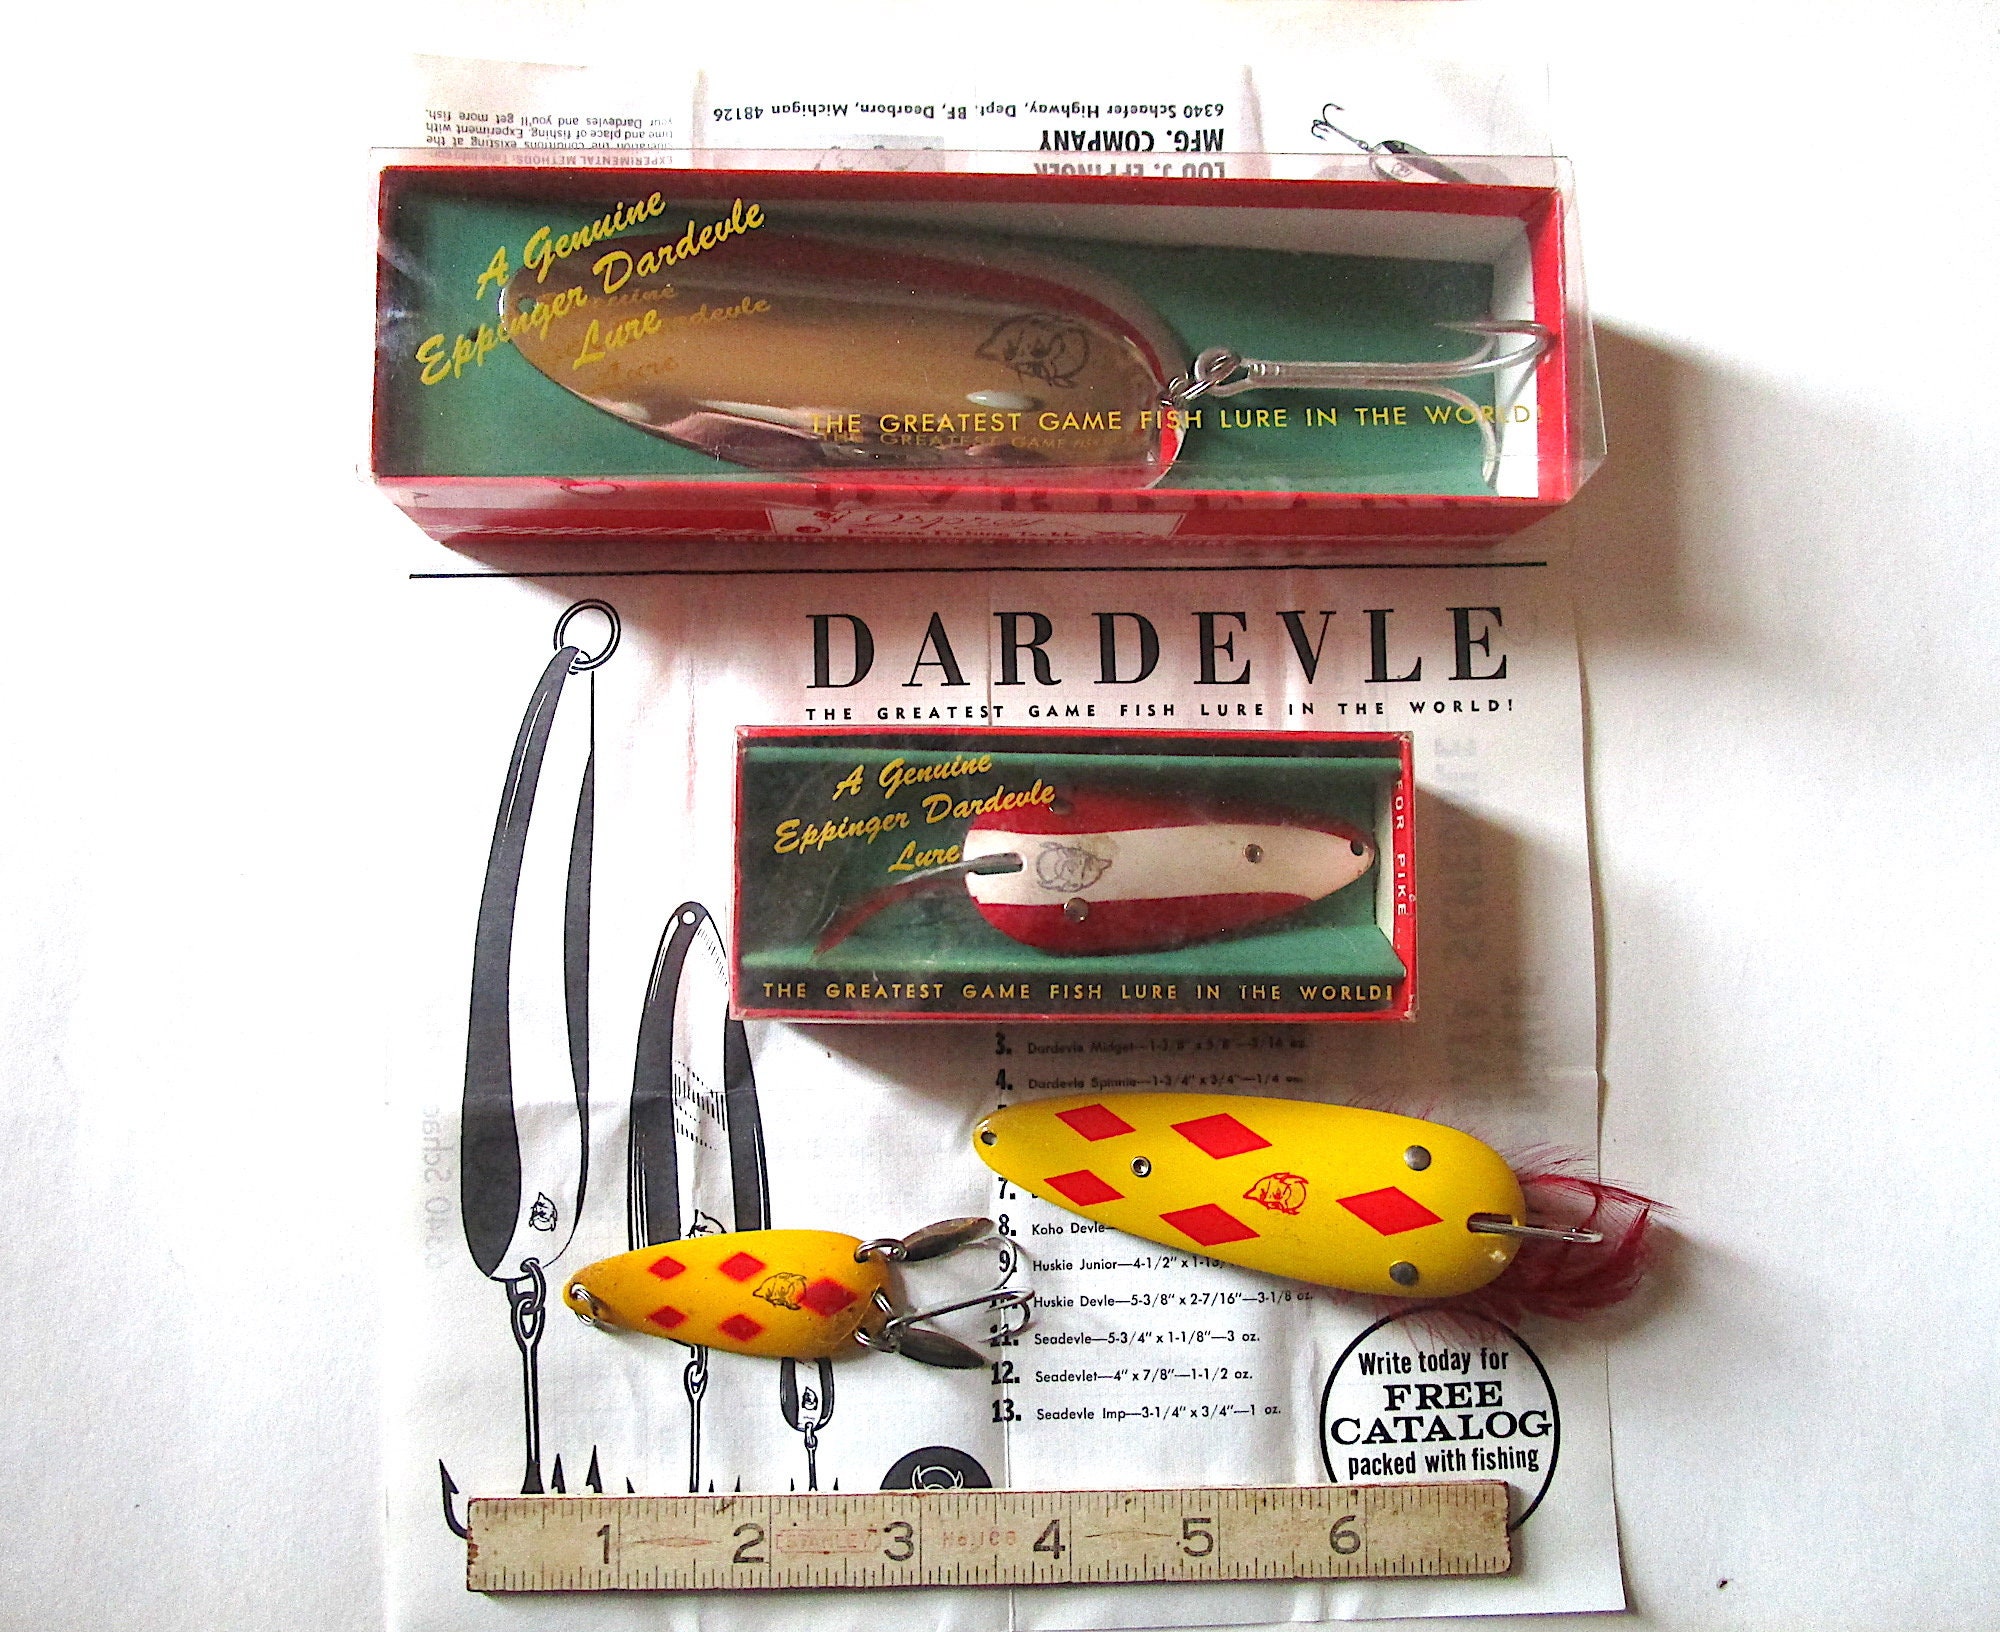 LR61 4 Eppinger osprey Vintage Dardevles Old Fishing Tackle Lures Boxes,  Catalog, Unusual Ones Long History Fish OR Yes Collectible 